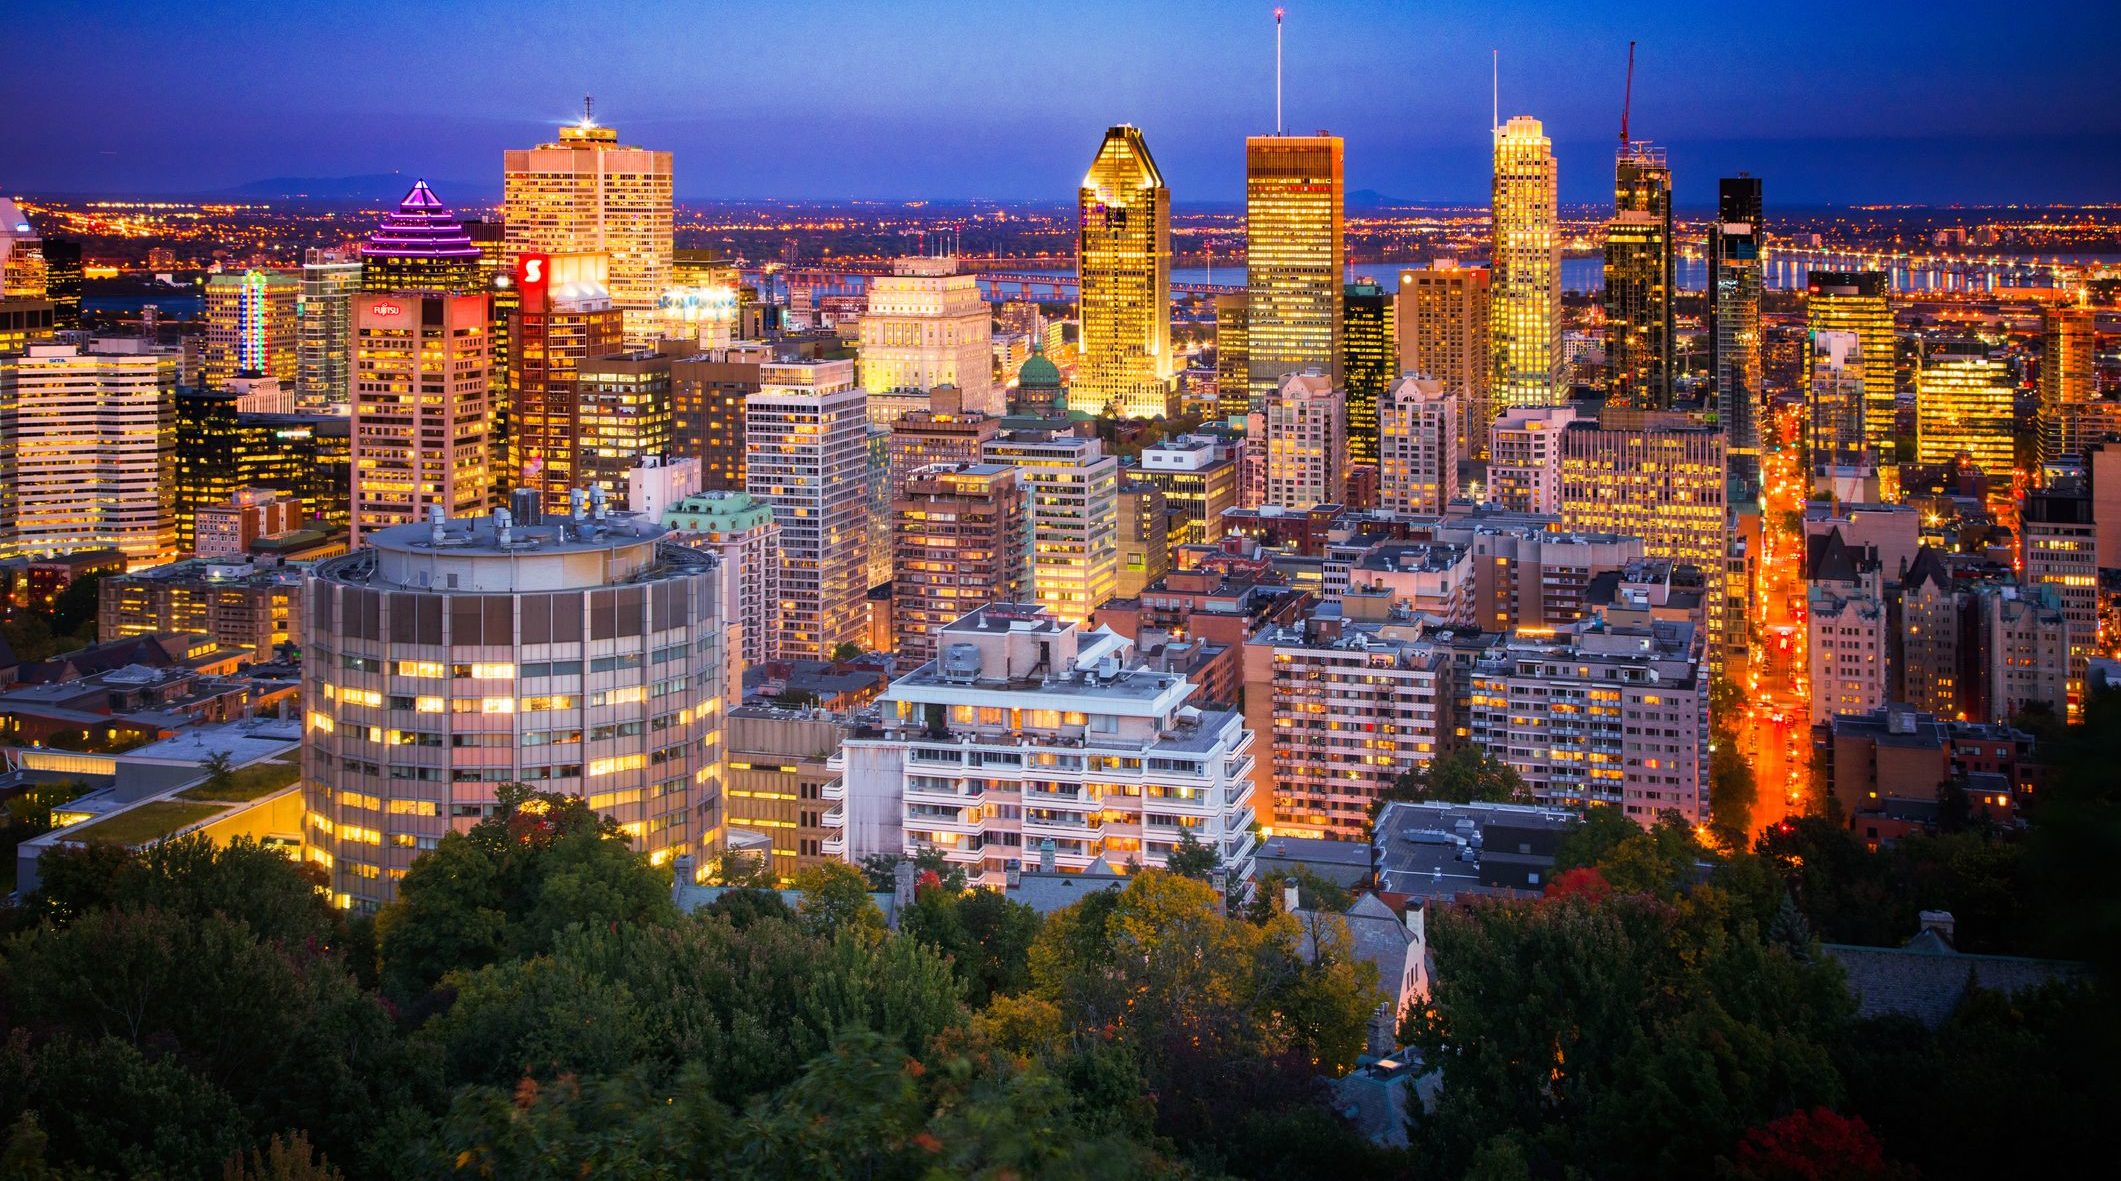 Part of the Greater Montreal Region